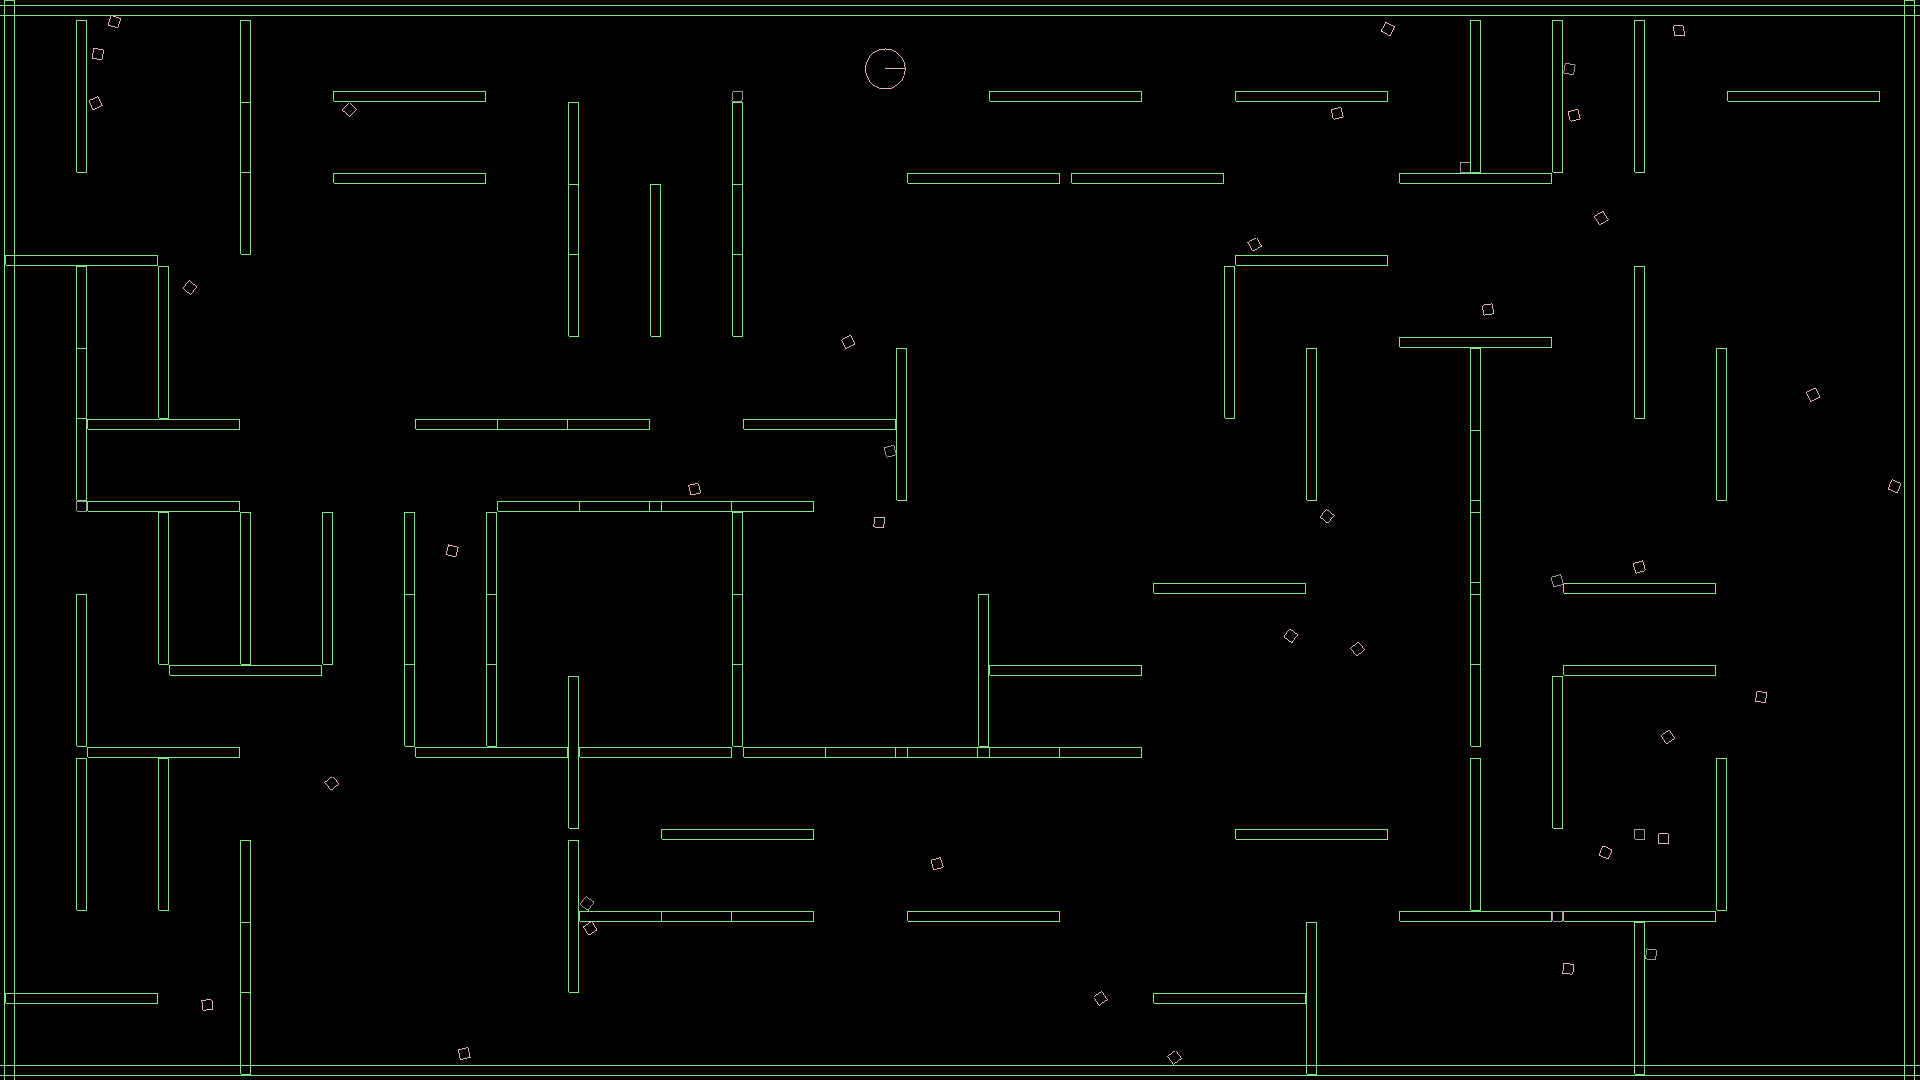 an initial attempt at creating a maze